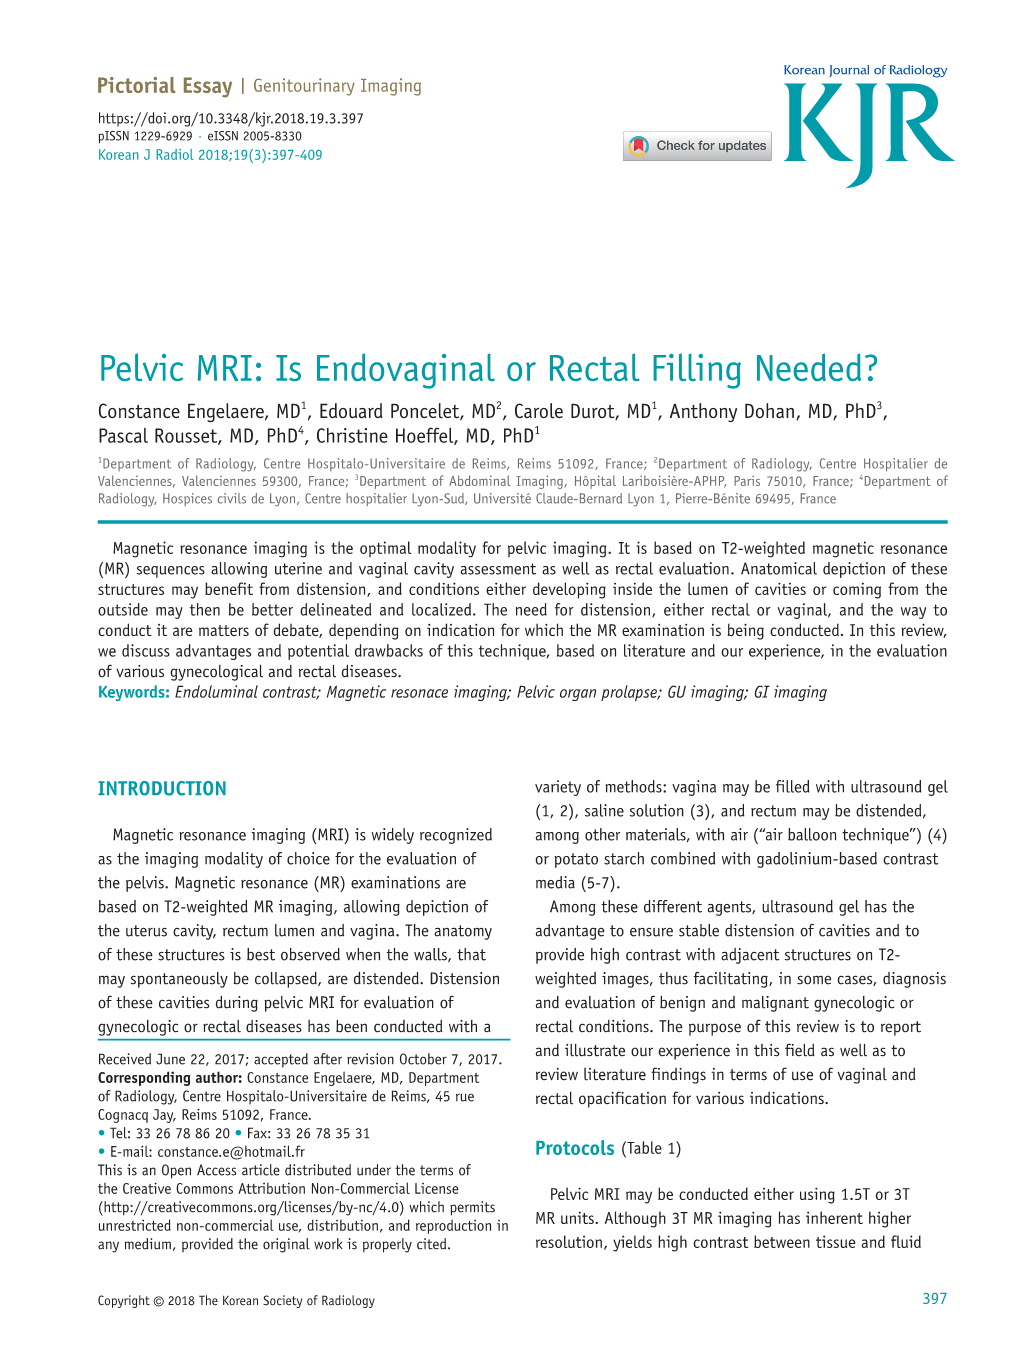 Pelvic MRI: Is Endovaginal Or Rectal Filling Needed?